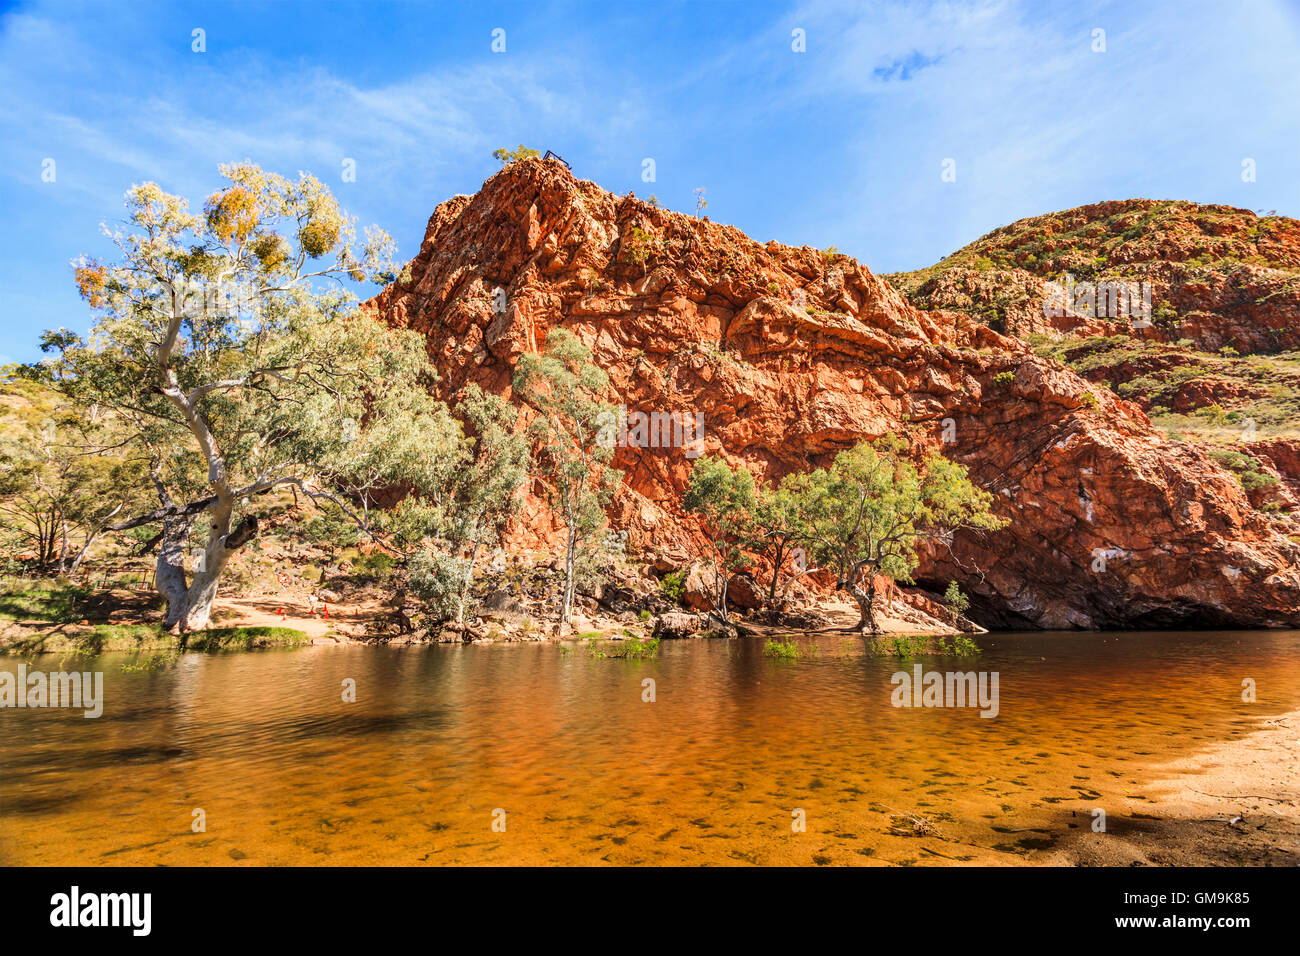 Australia, Outback, Northern Territory, Red Centre, West Macdonnel Ranges, Ormiston Gorge, Orange colored lake in red rock mountains Stock Photo